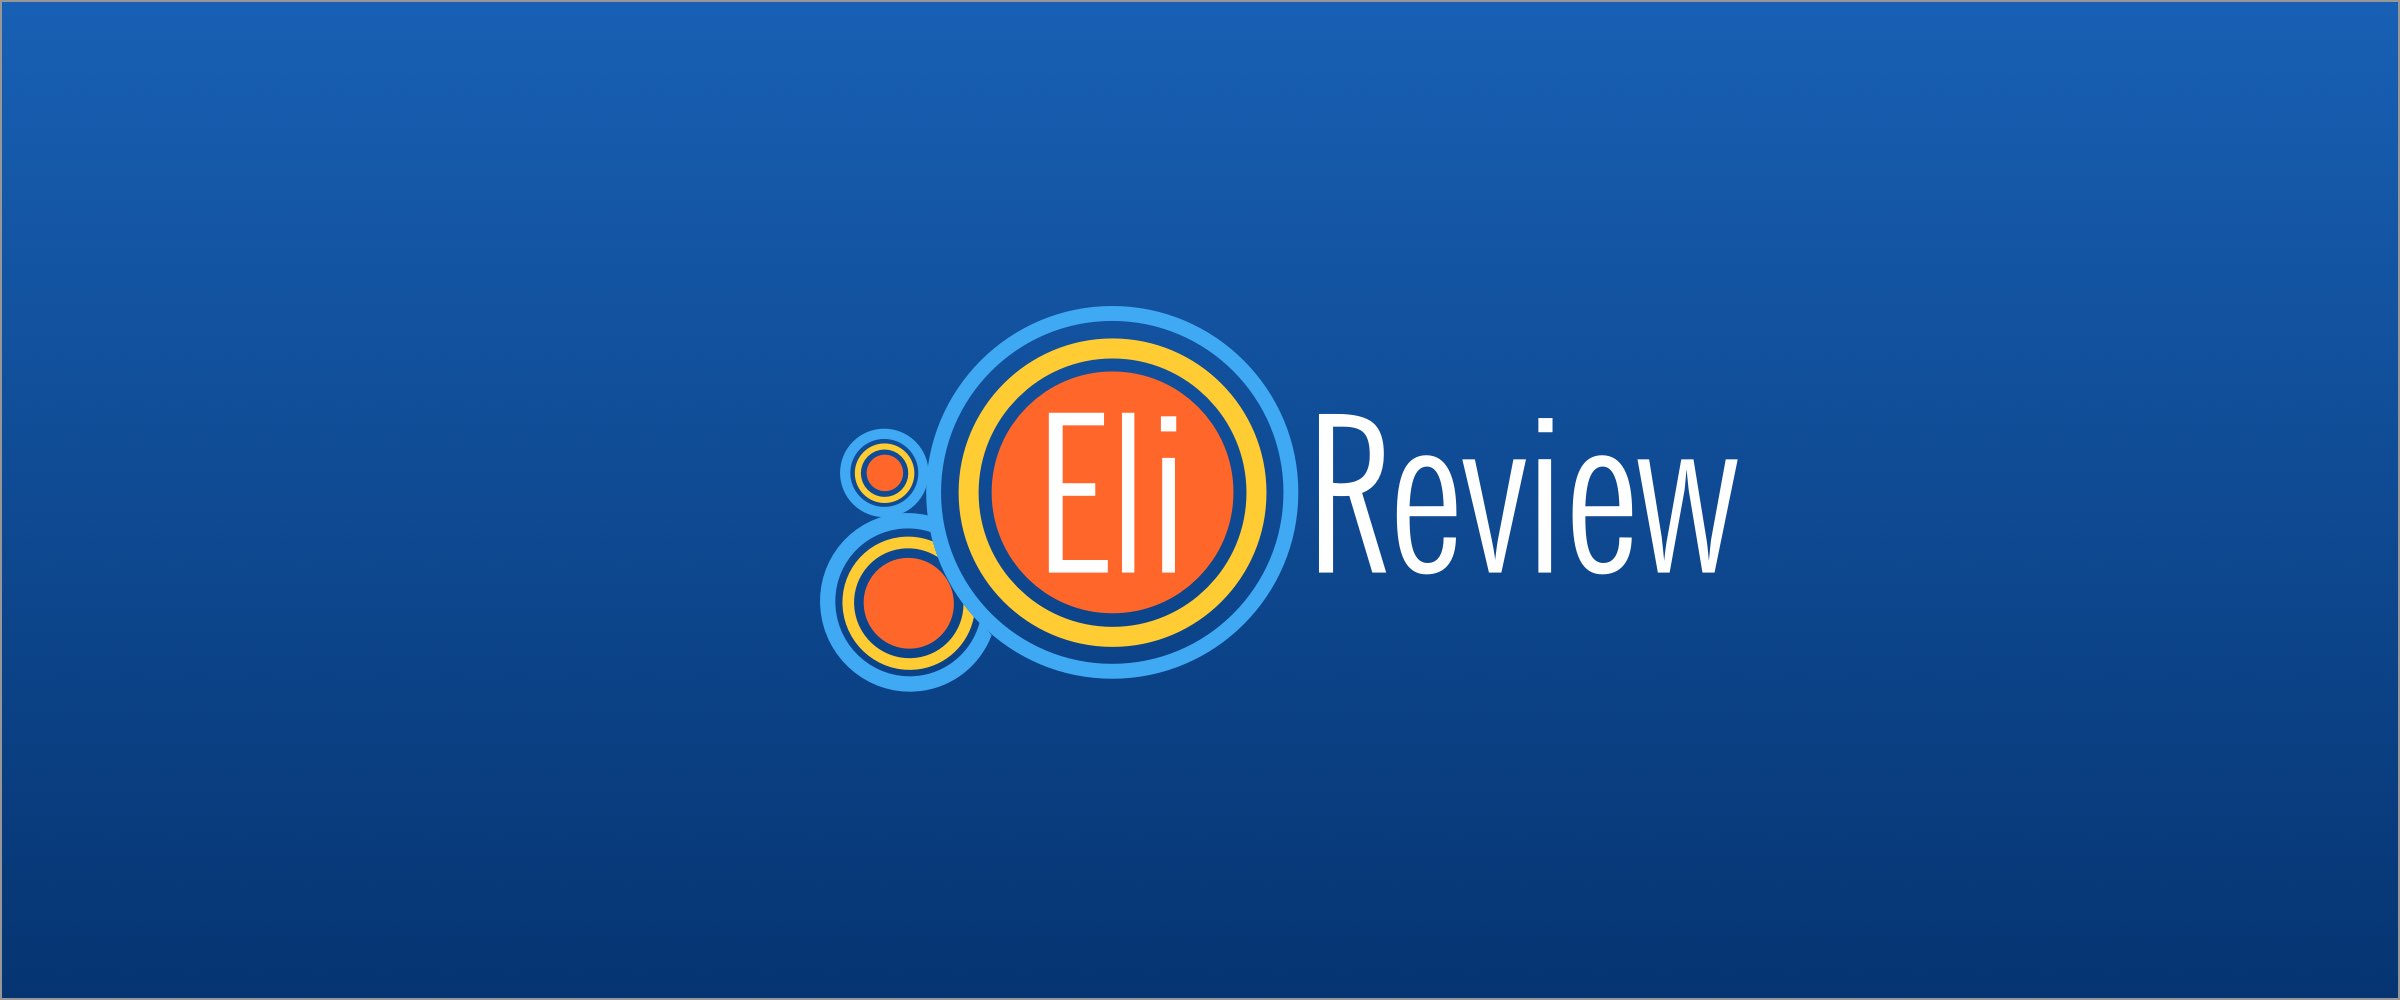 Eli Review Imagery